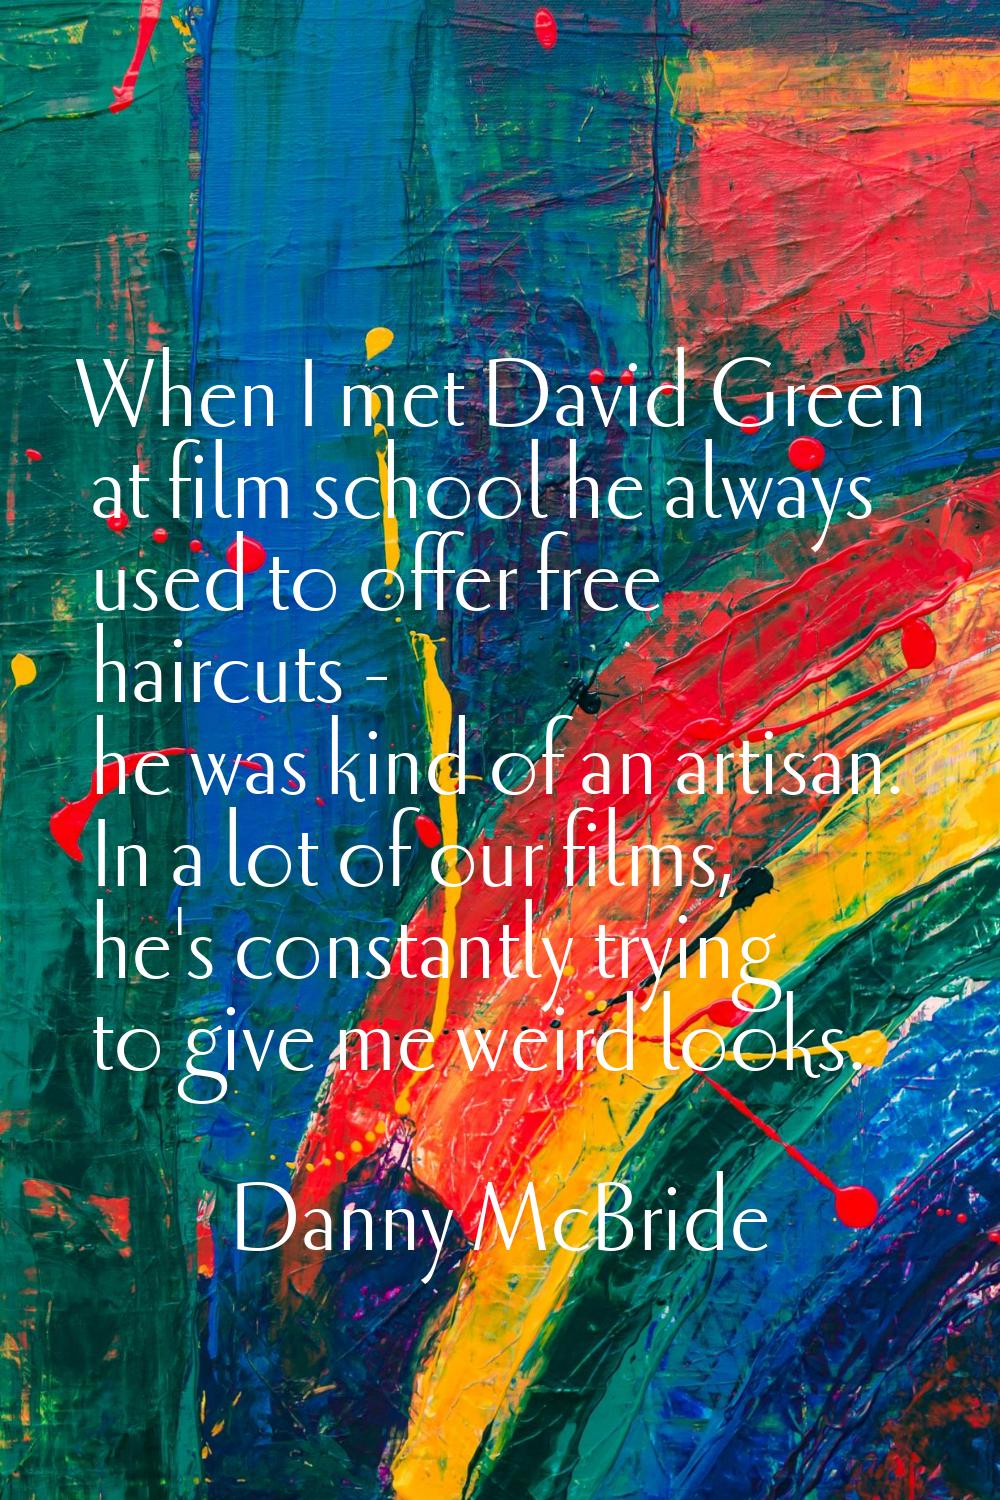 When I met David Green at film school he always used to offer free haircuts - he was kind of an art